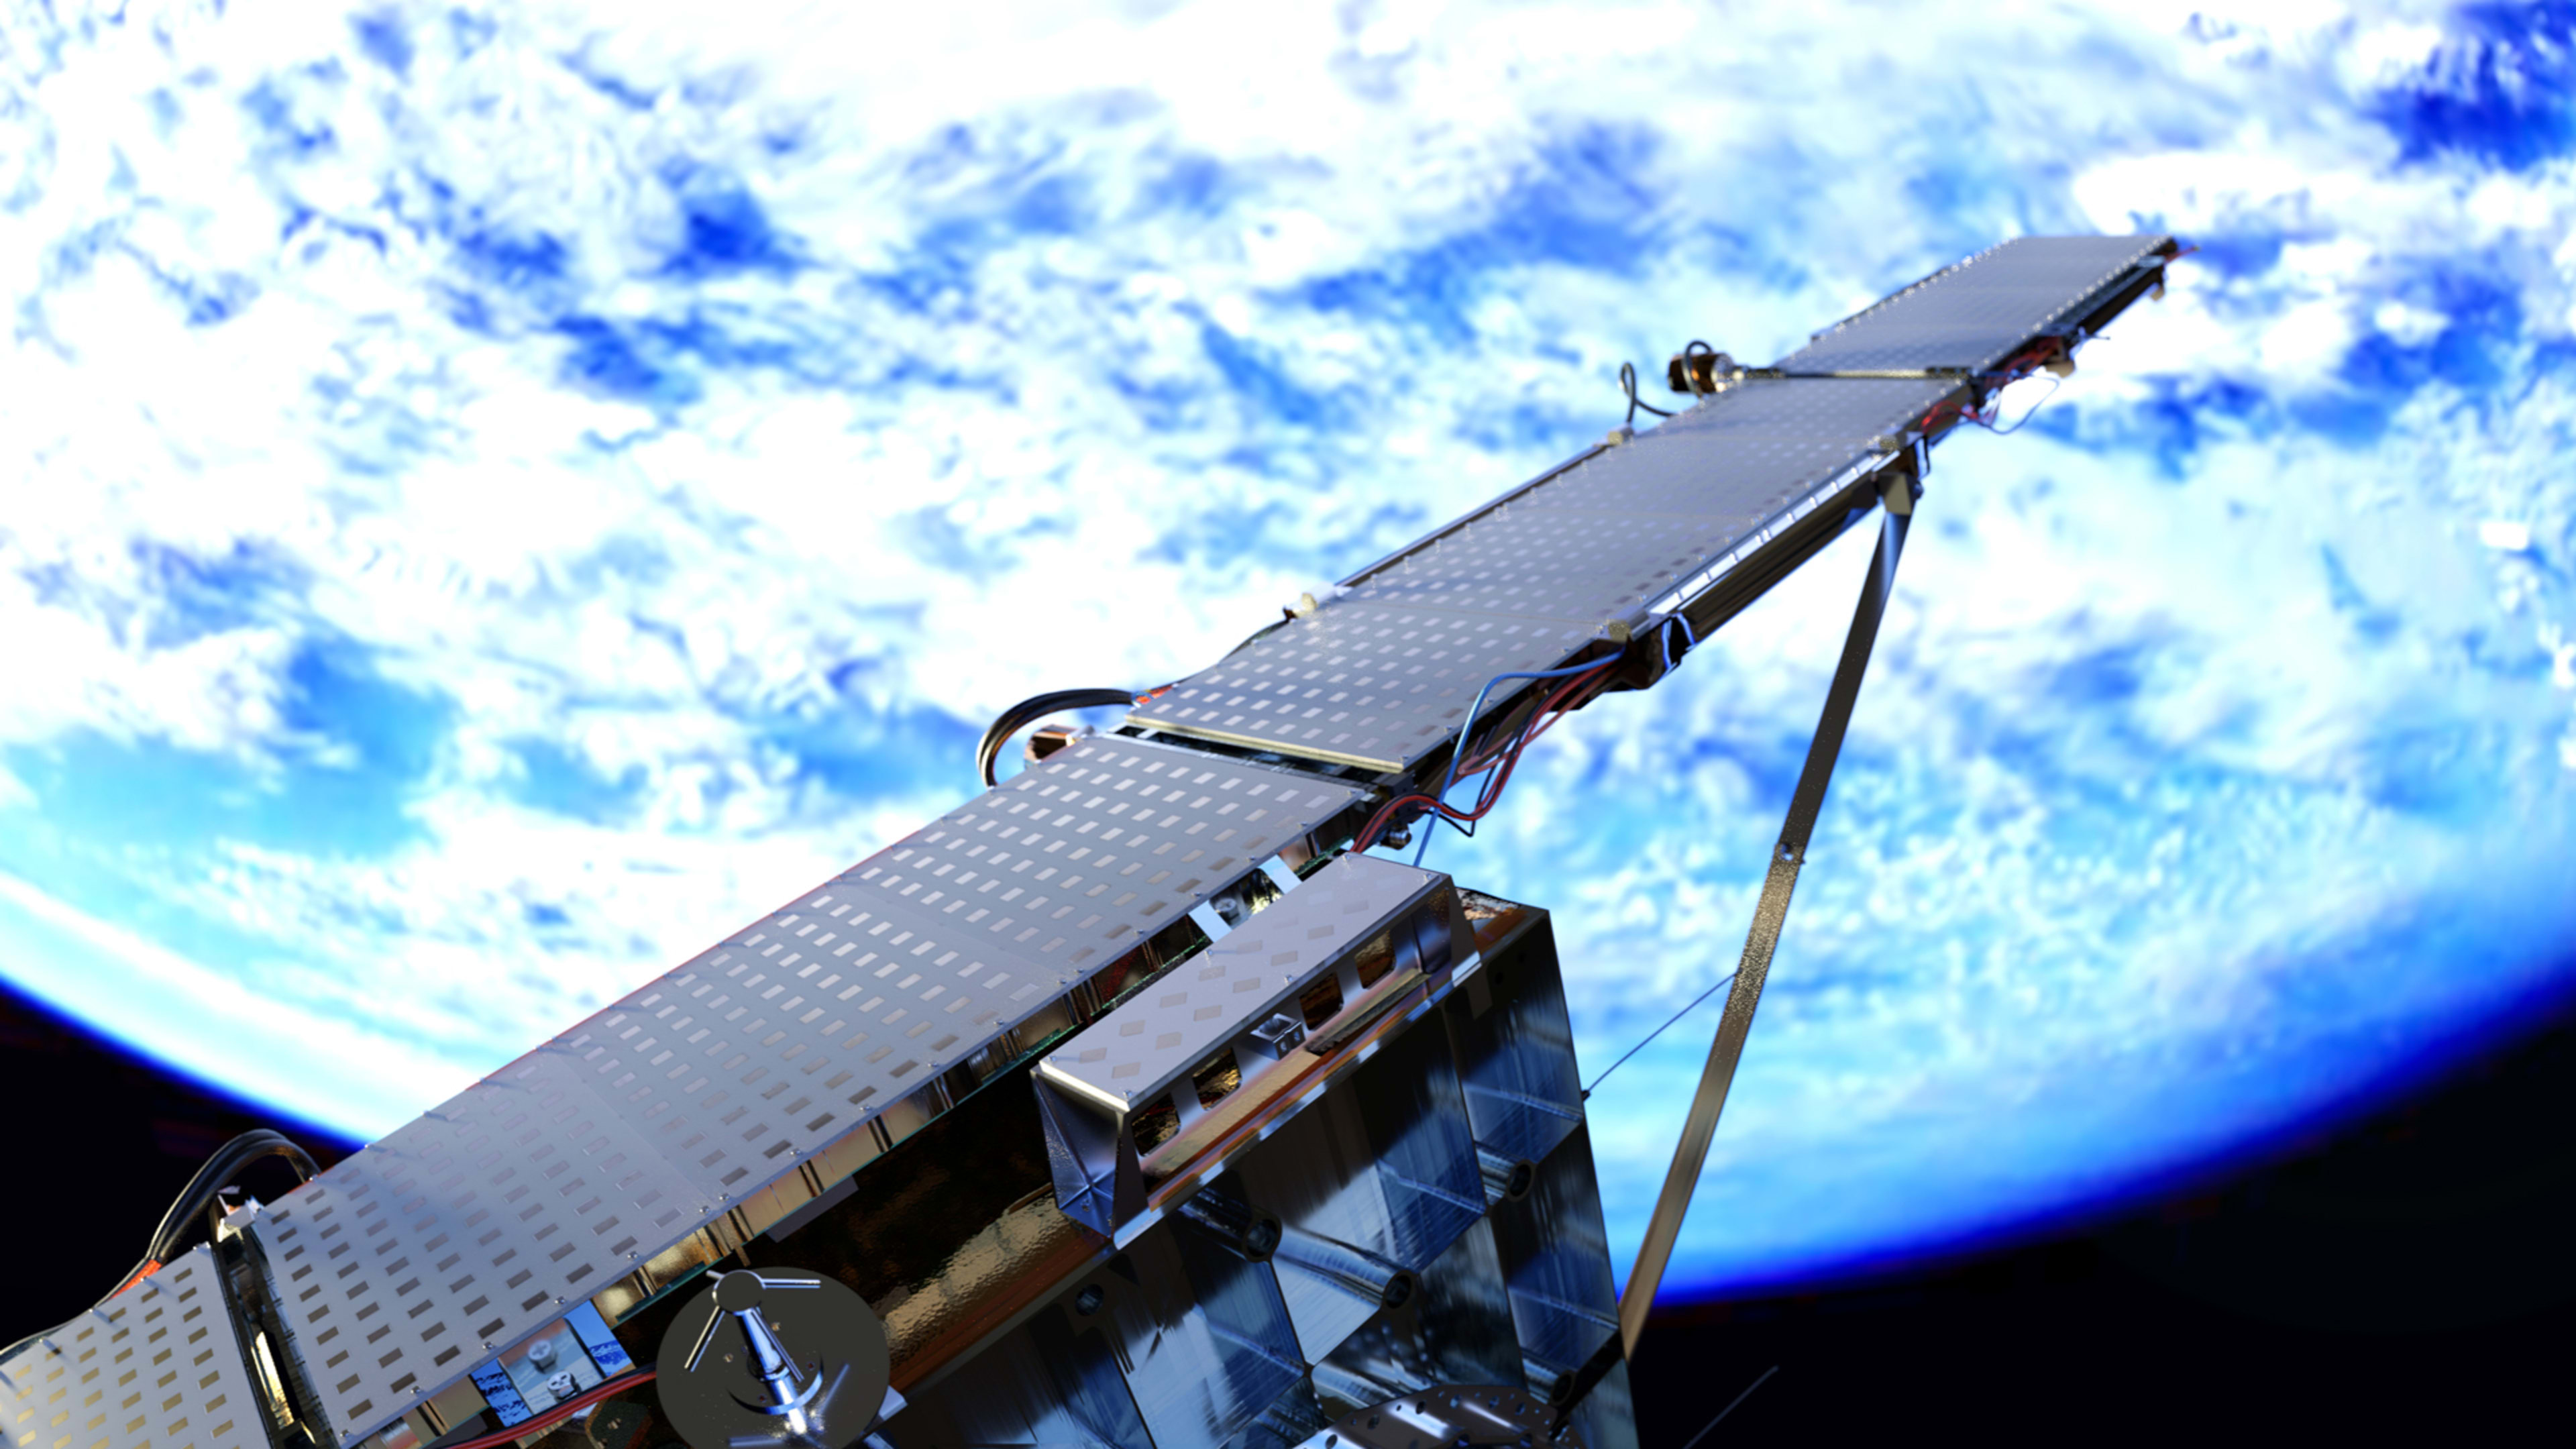 New Low-Cost Spy Satellites Are Getting Scarily Powerful